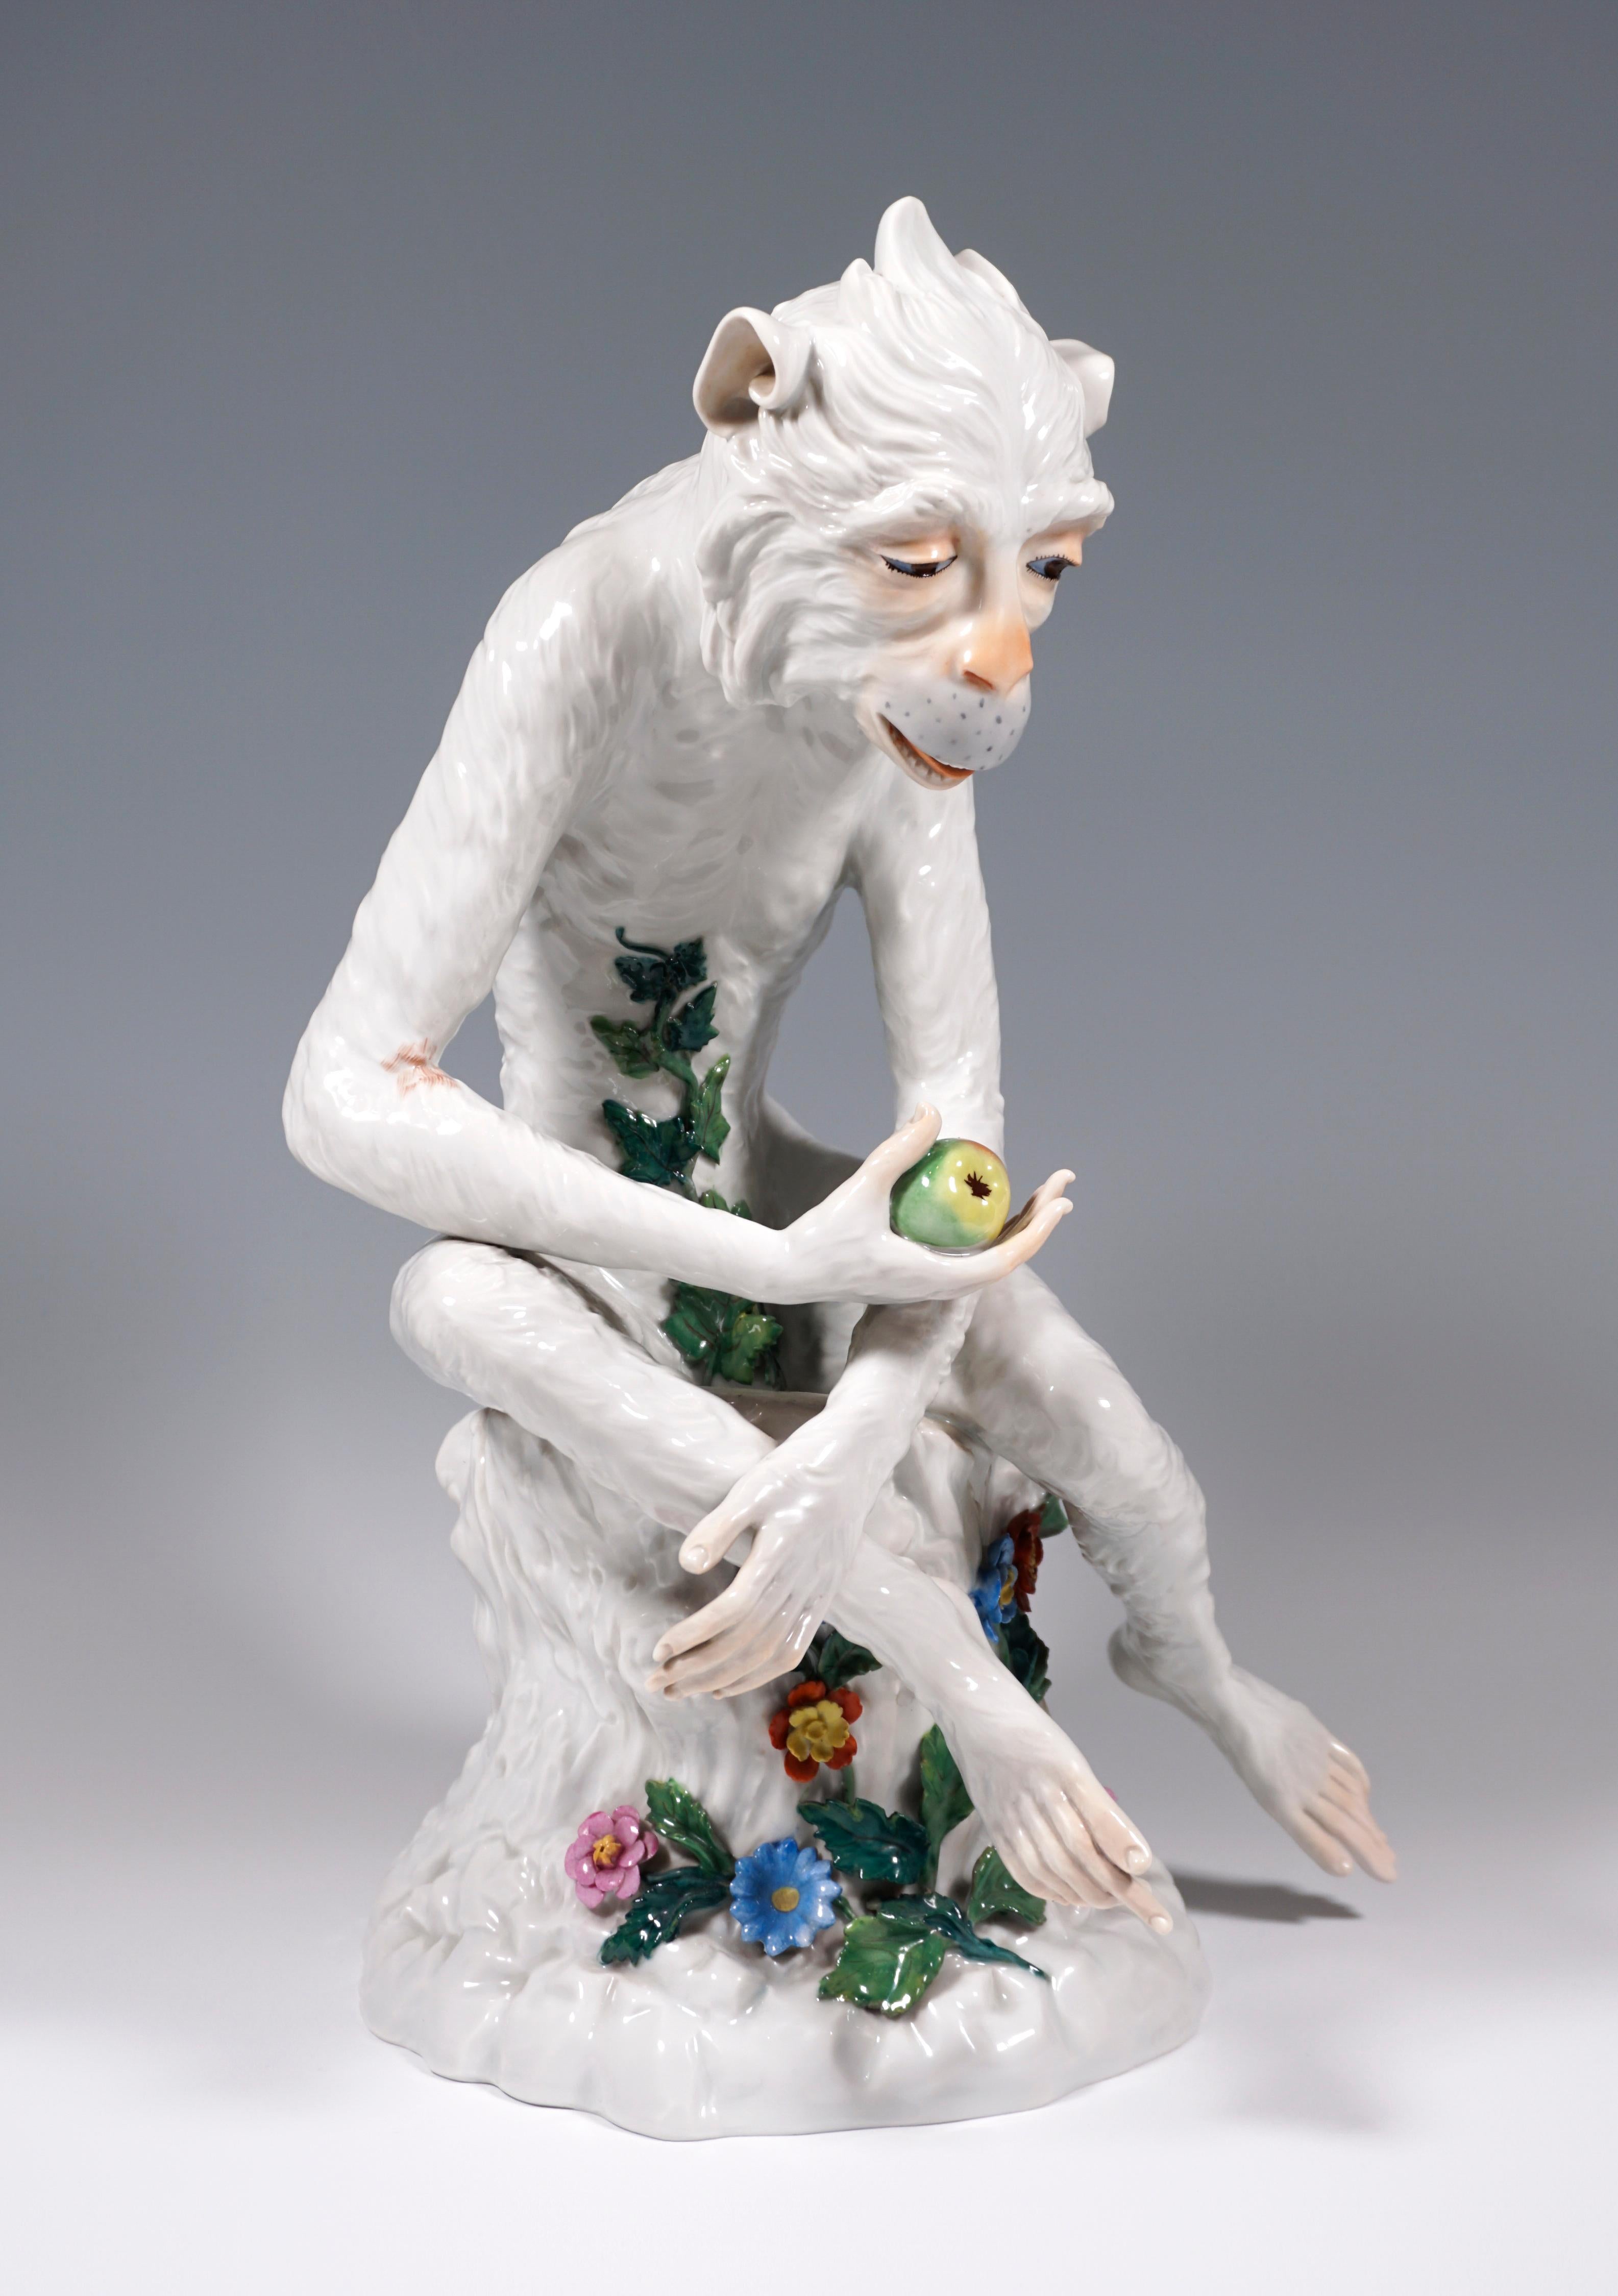 Remarkable animal figure made of the finest Dresden Porcelain around 1900.
Monkey sitting hunched over on a tree stump, holding an apple in his hand, in a naturalistic form based on the design by Johann Gottlieb Kirchner, with sparing, polychrome